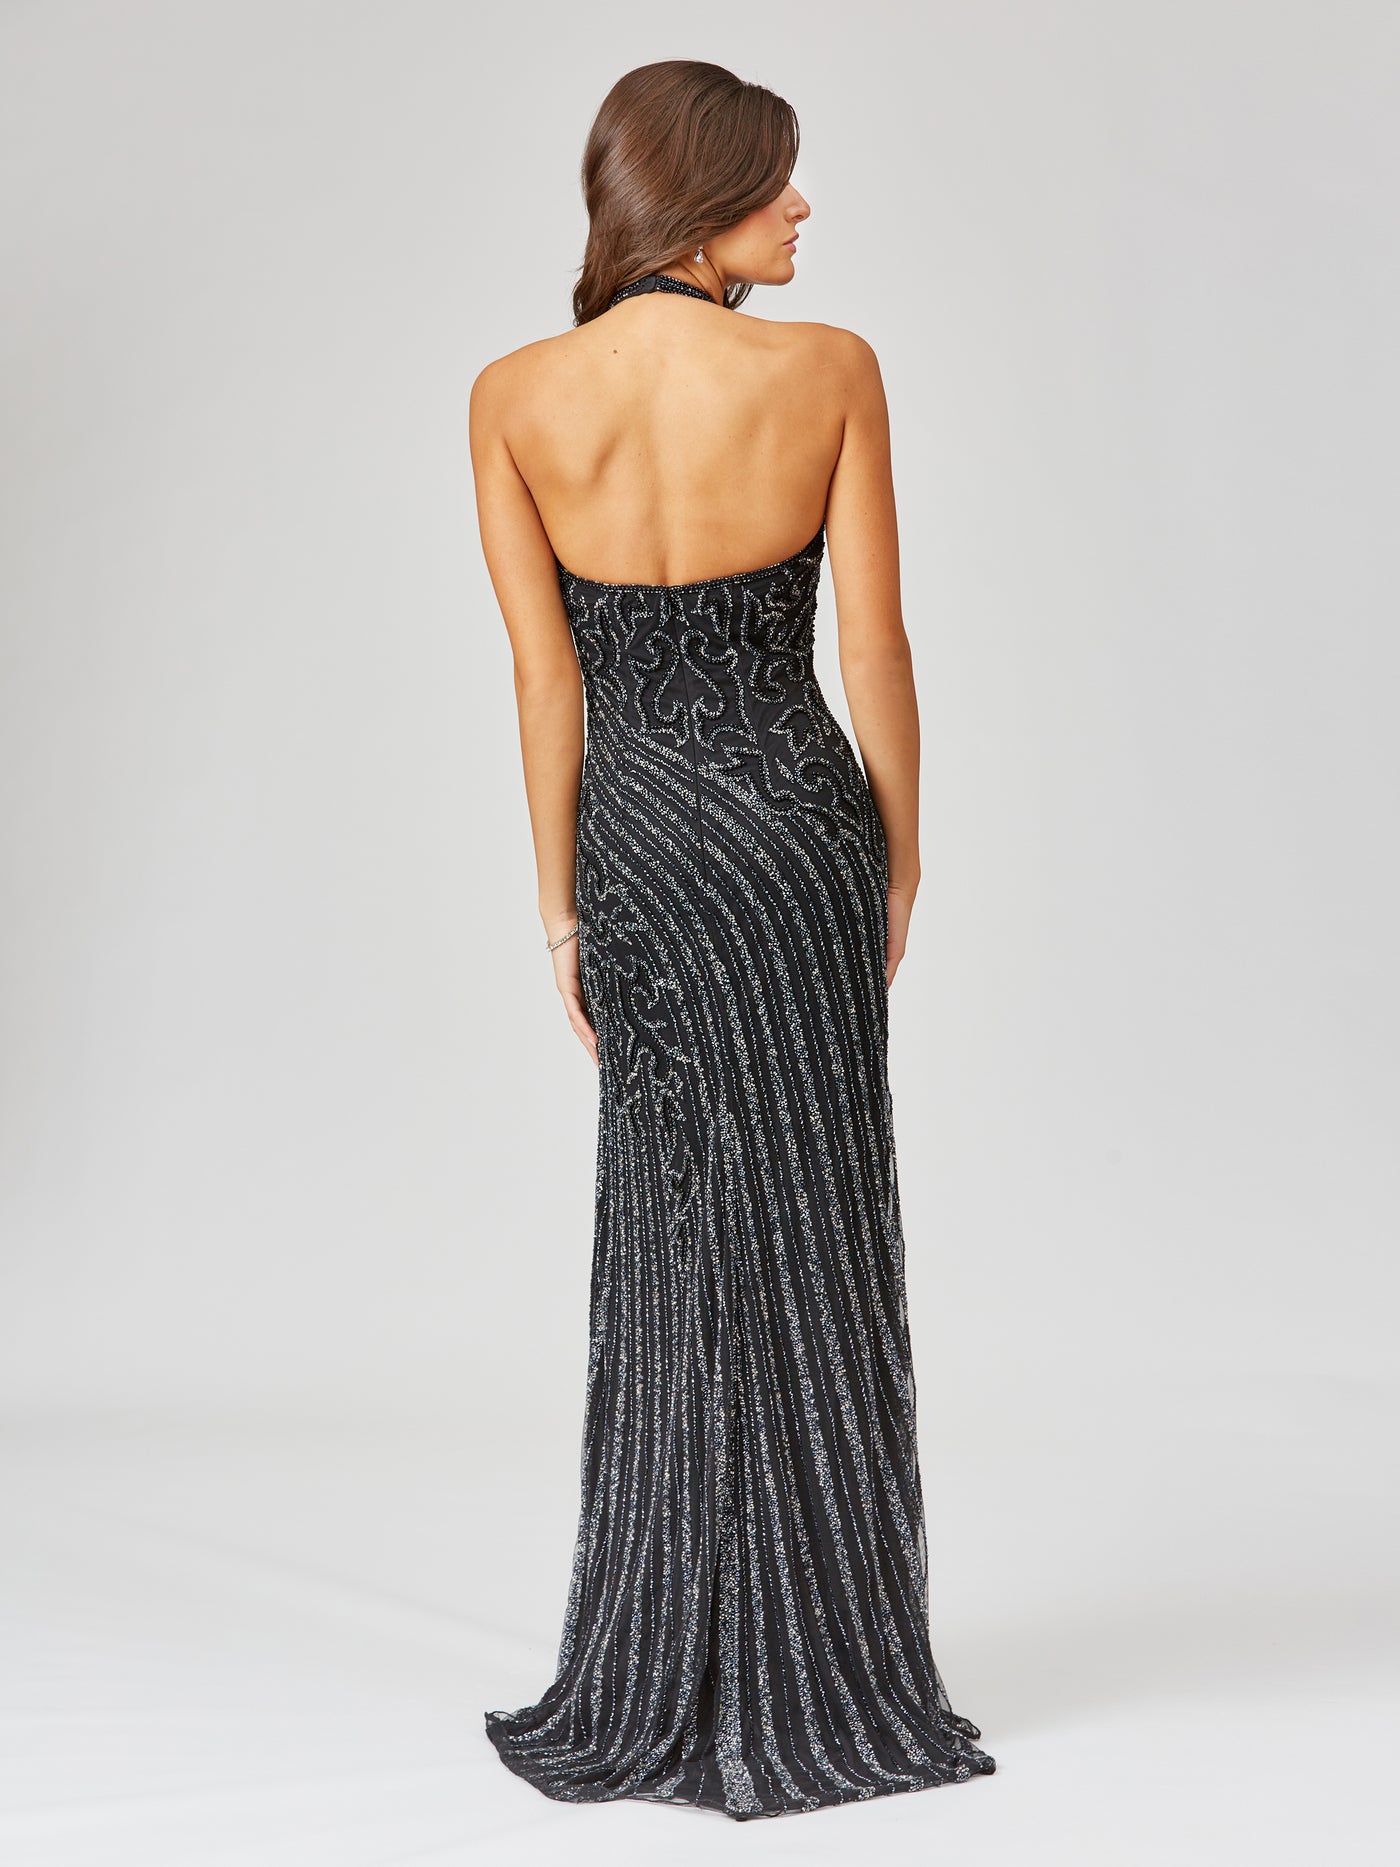 Giselle Beaded Halter Gown with Slit